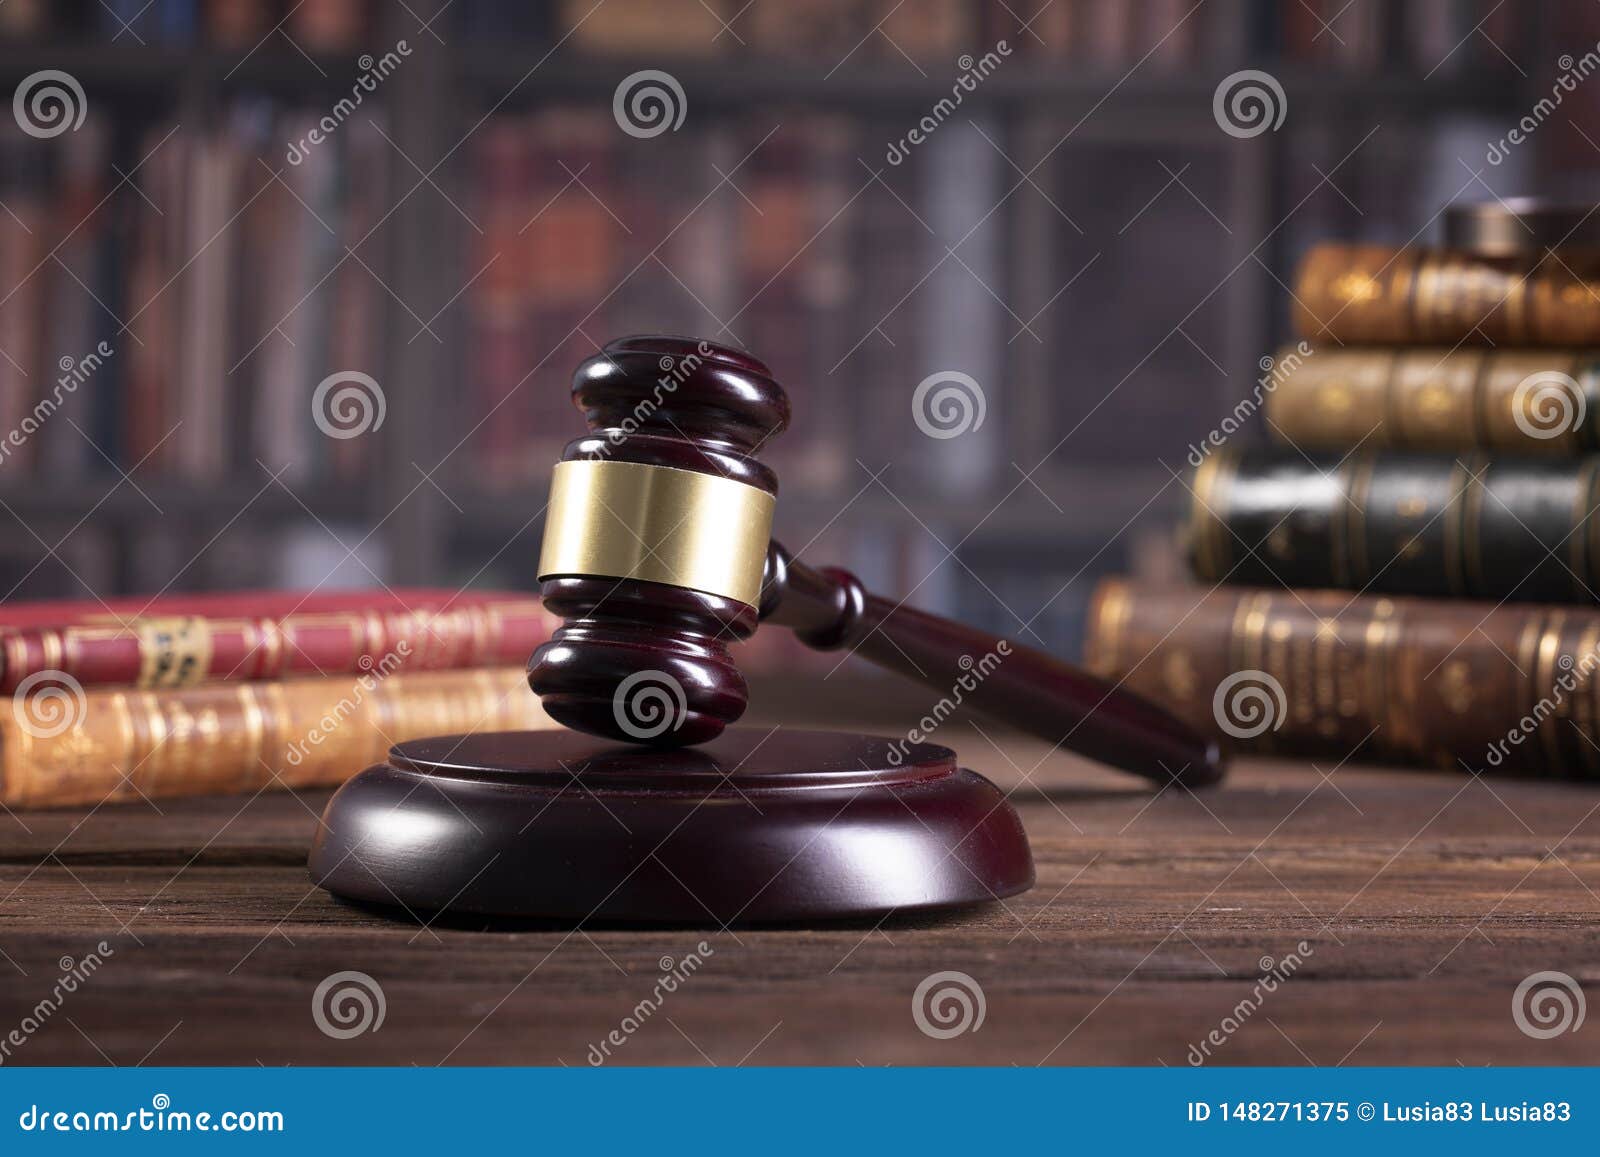 wooden judge`s gavel and law books with treating of laws, legal issues, or cases